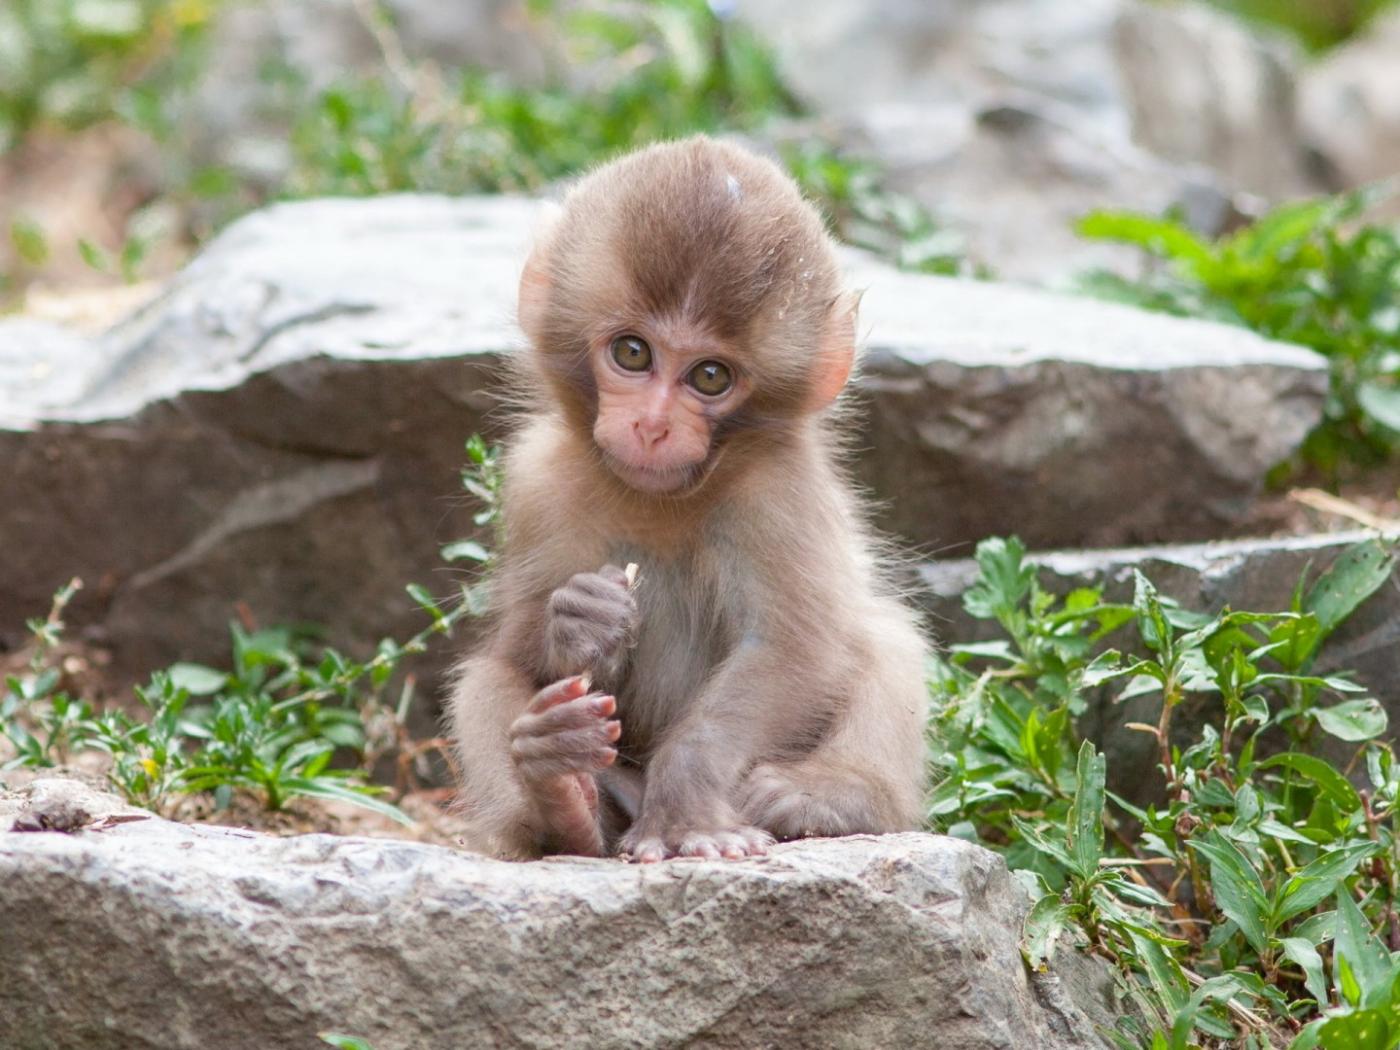 Pictures of Baby Monkeys Wallpaper in HD HD Wallpapers